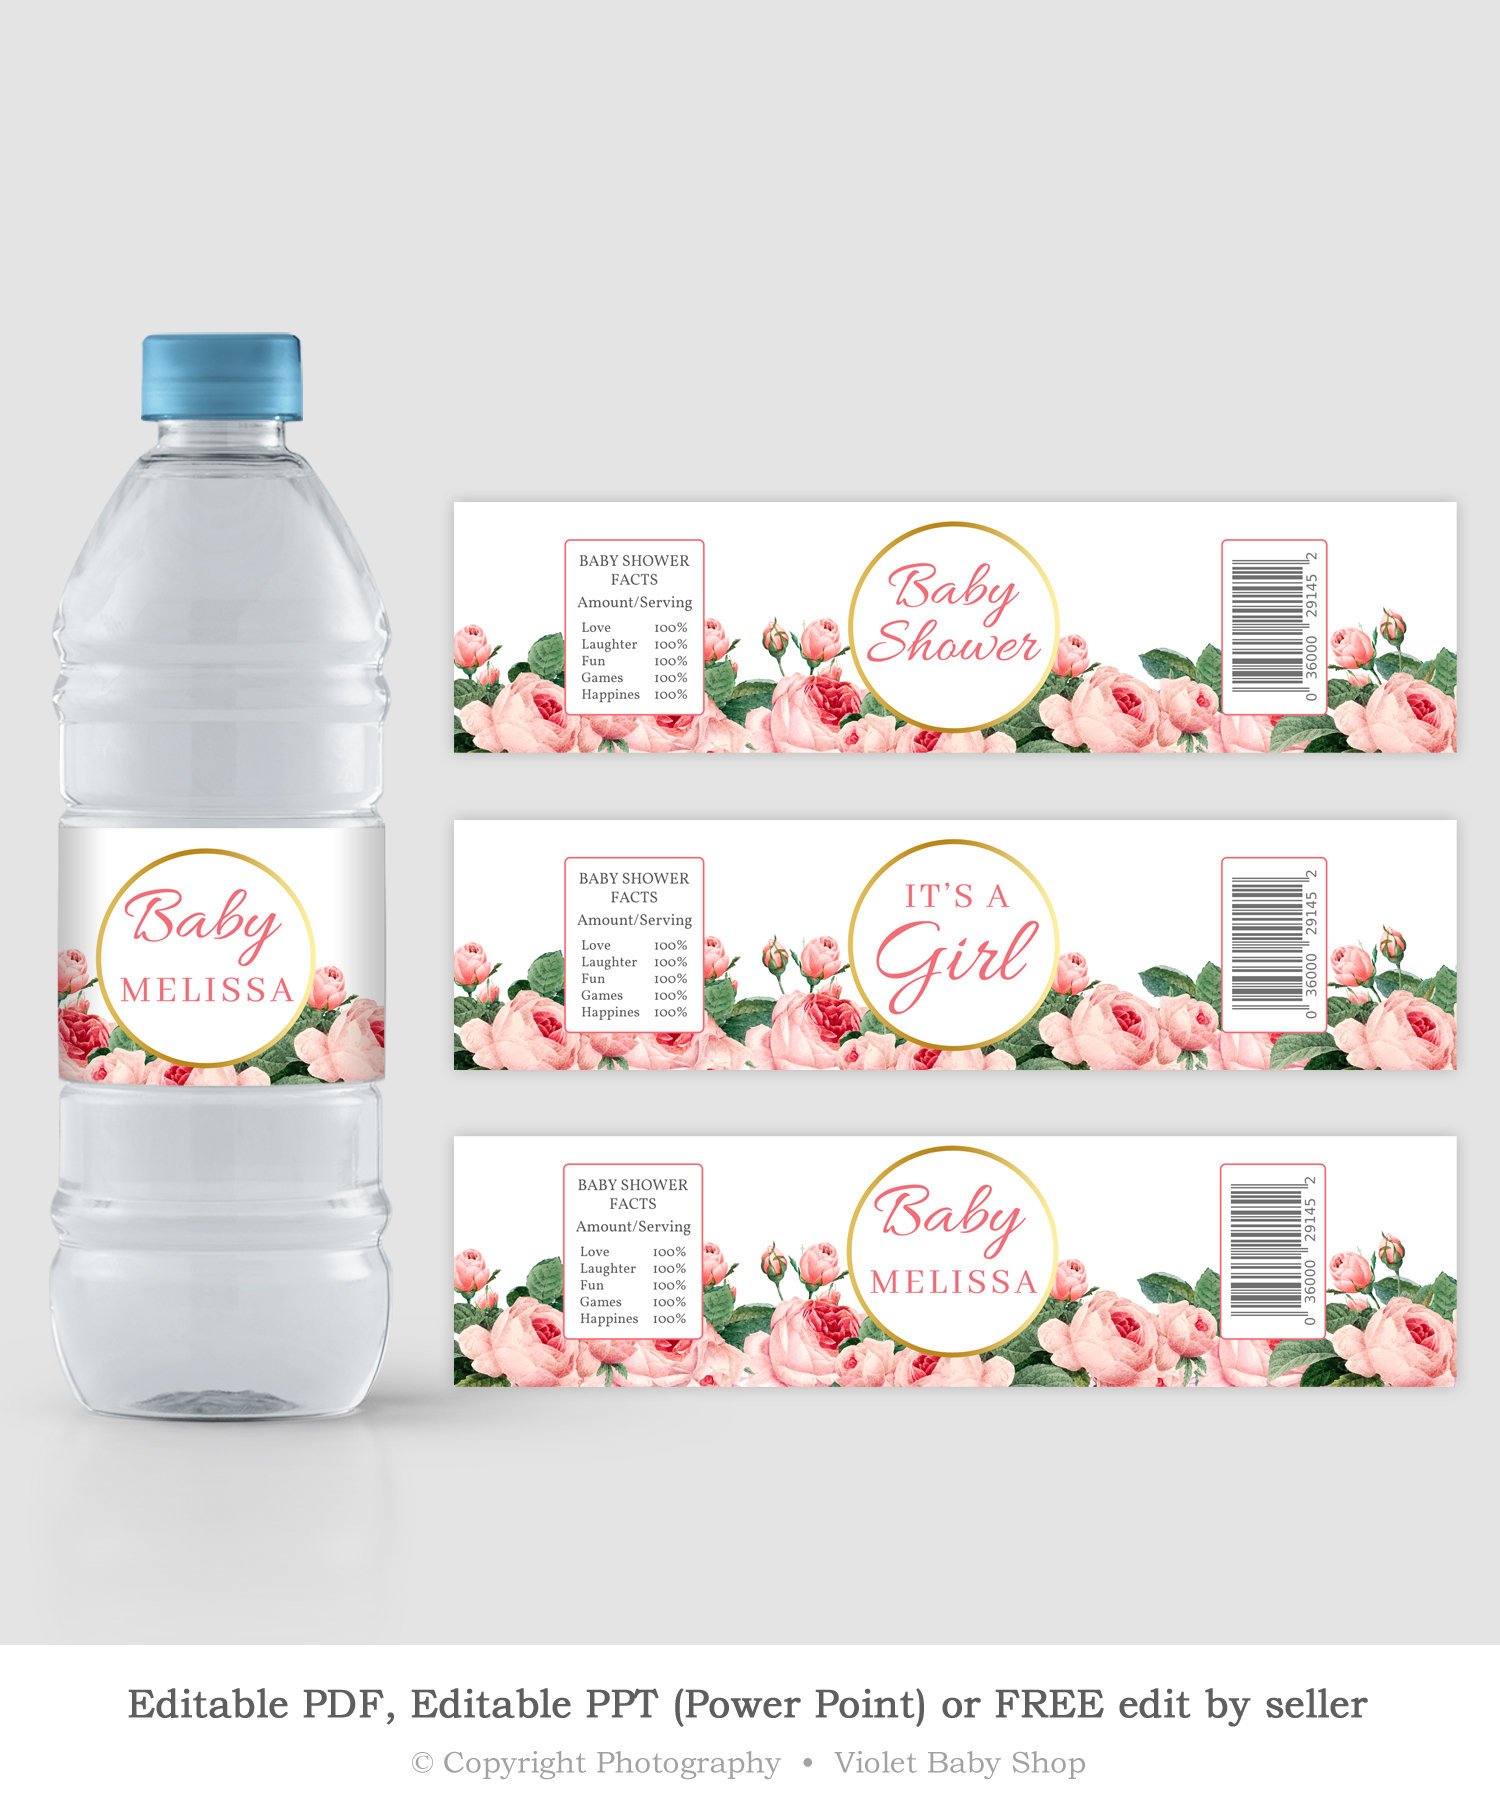 Violeta on Twitter: "Pink Roses Water Bottle Label Template Regarding Free Water Bottle Labels For Baby Shower Template